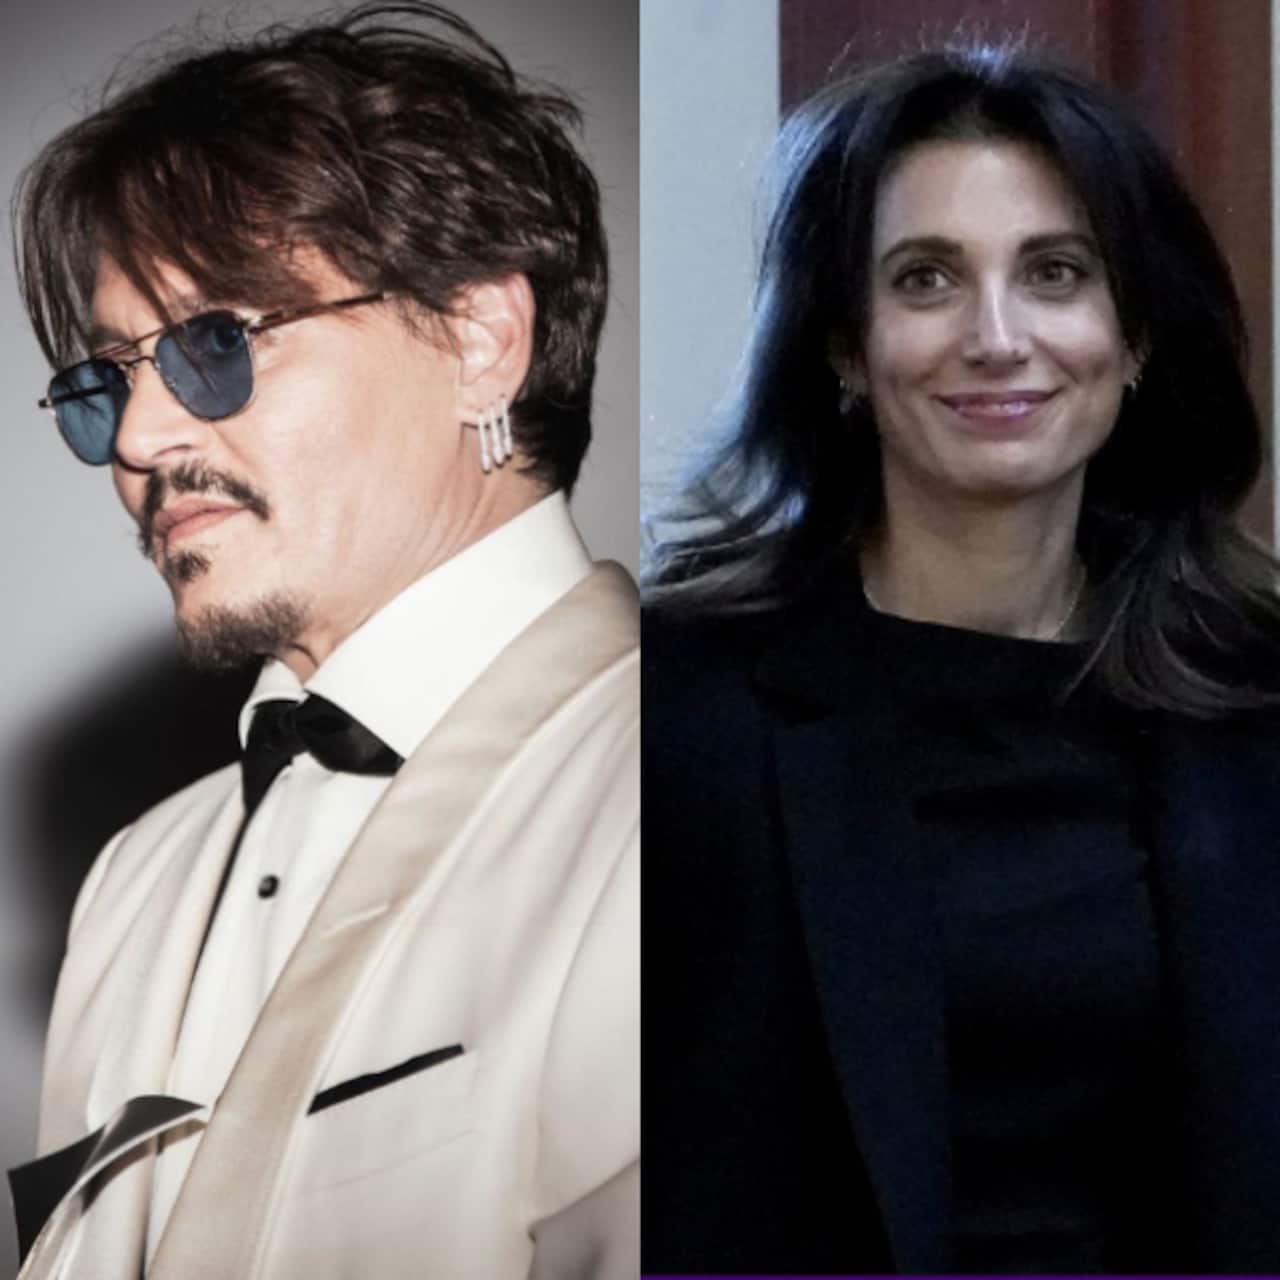 Johnny Depp and British lawyer girlfriend Joelle Rich call it quits? This is what we know